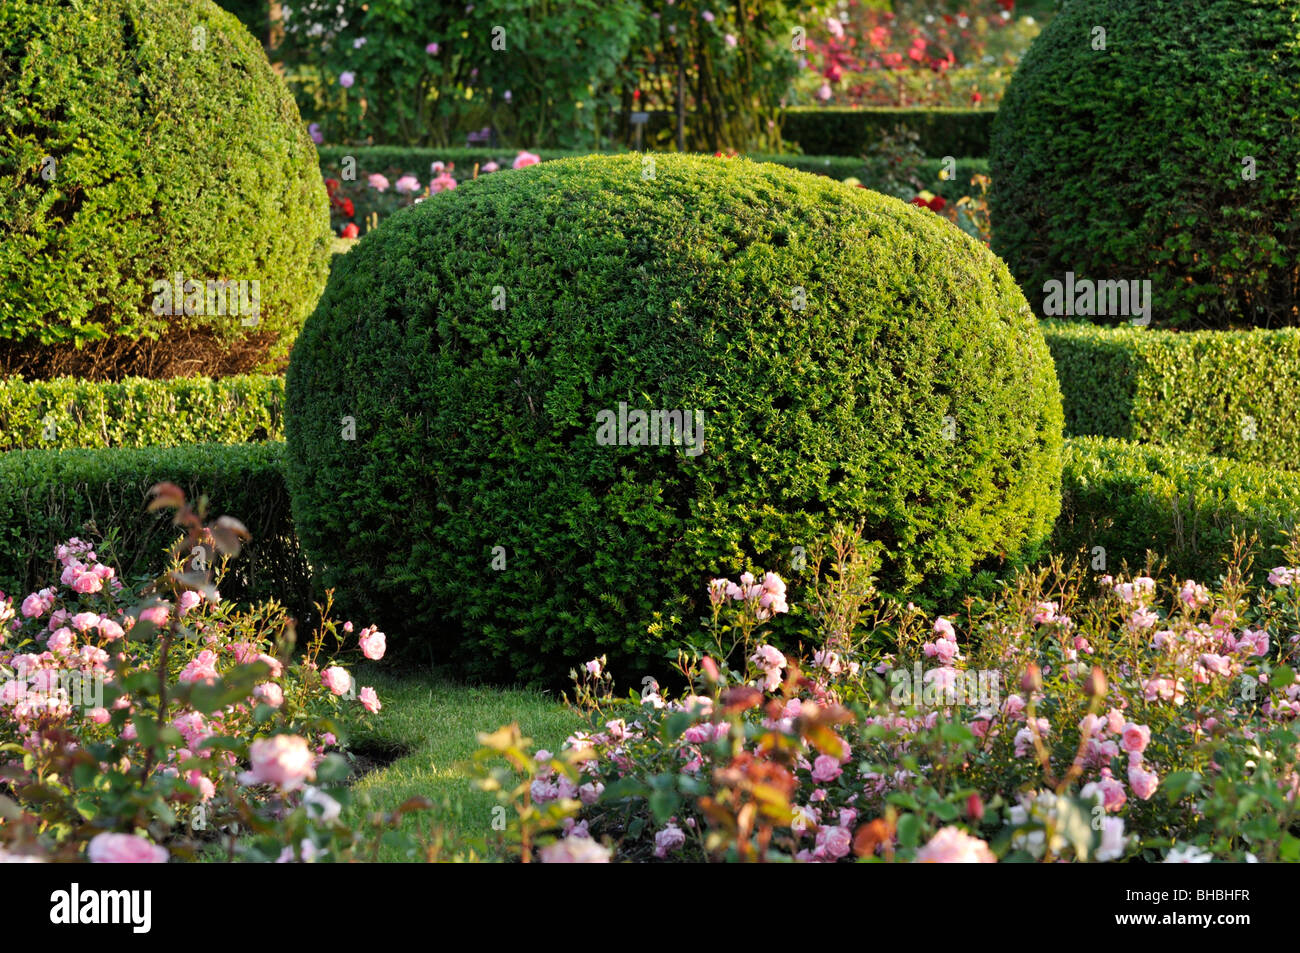 Common yew (Taxus baccata) with spherical shape in a rose garden, Britzer Garten, Berlin, Germany Stock Photo